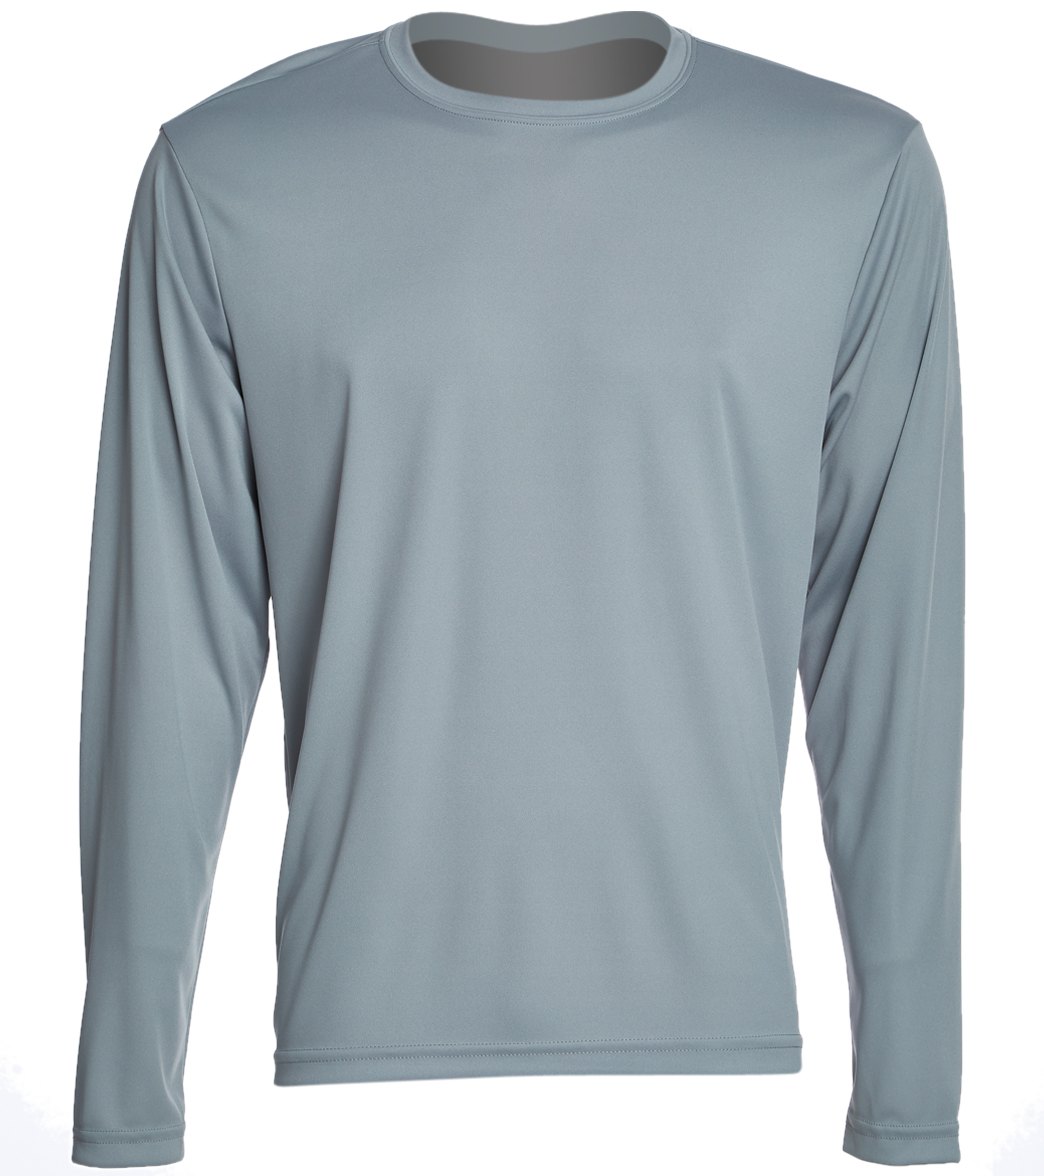 Men's Long Sleeve Posicharge Competitortm Tee Shirt - Silver X-Small Polyester - Swimoutlet.com